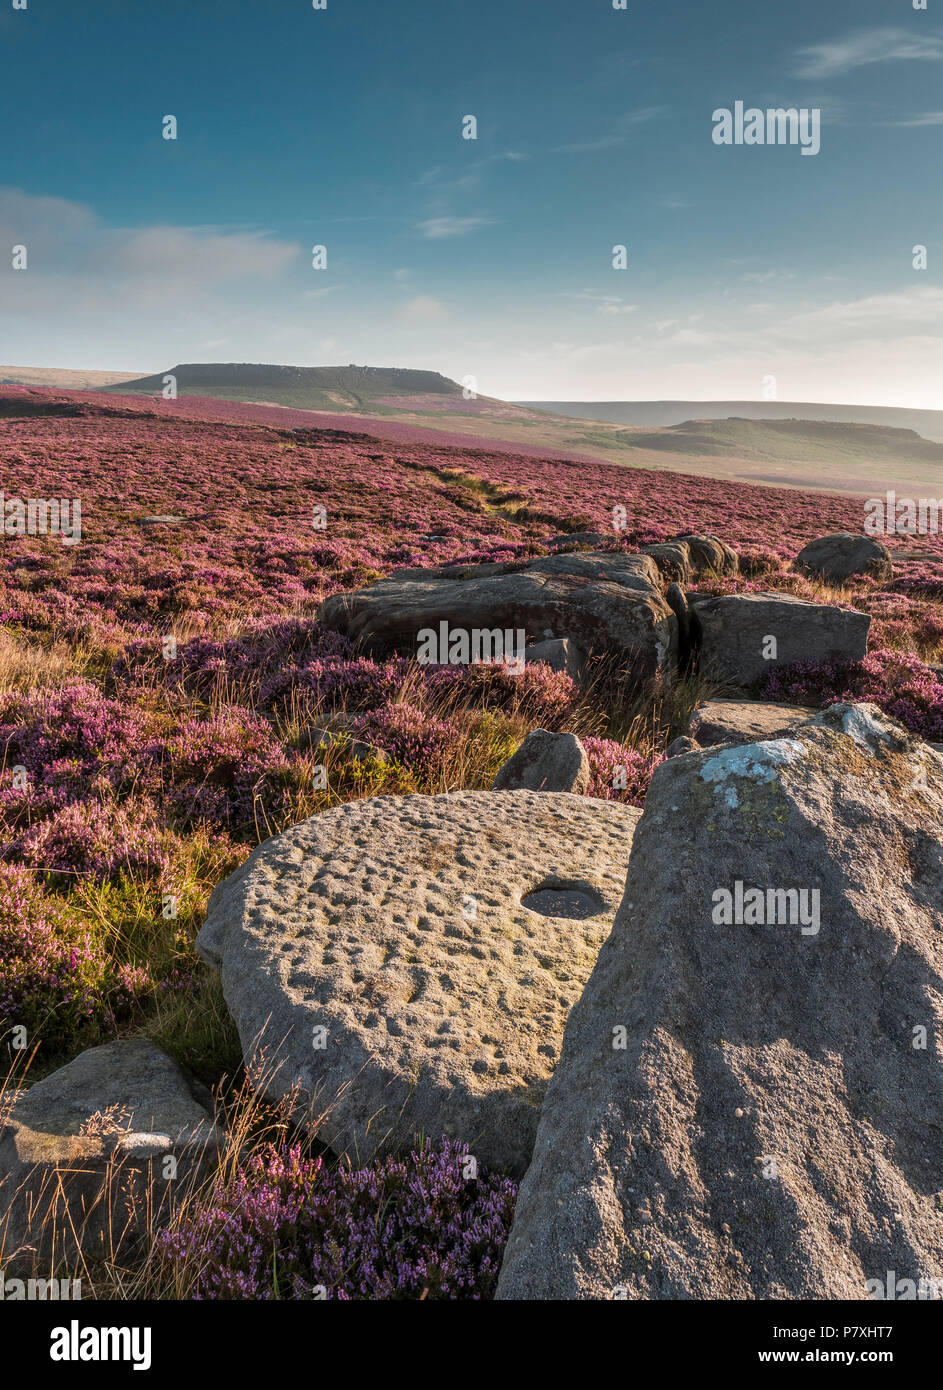 A millstone in the heather on the Derbyshire moorland. Stock Photo